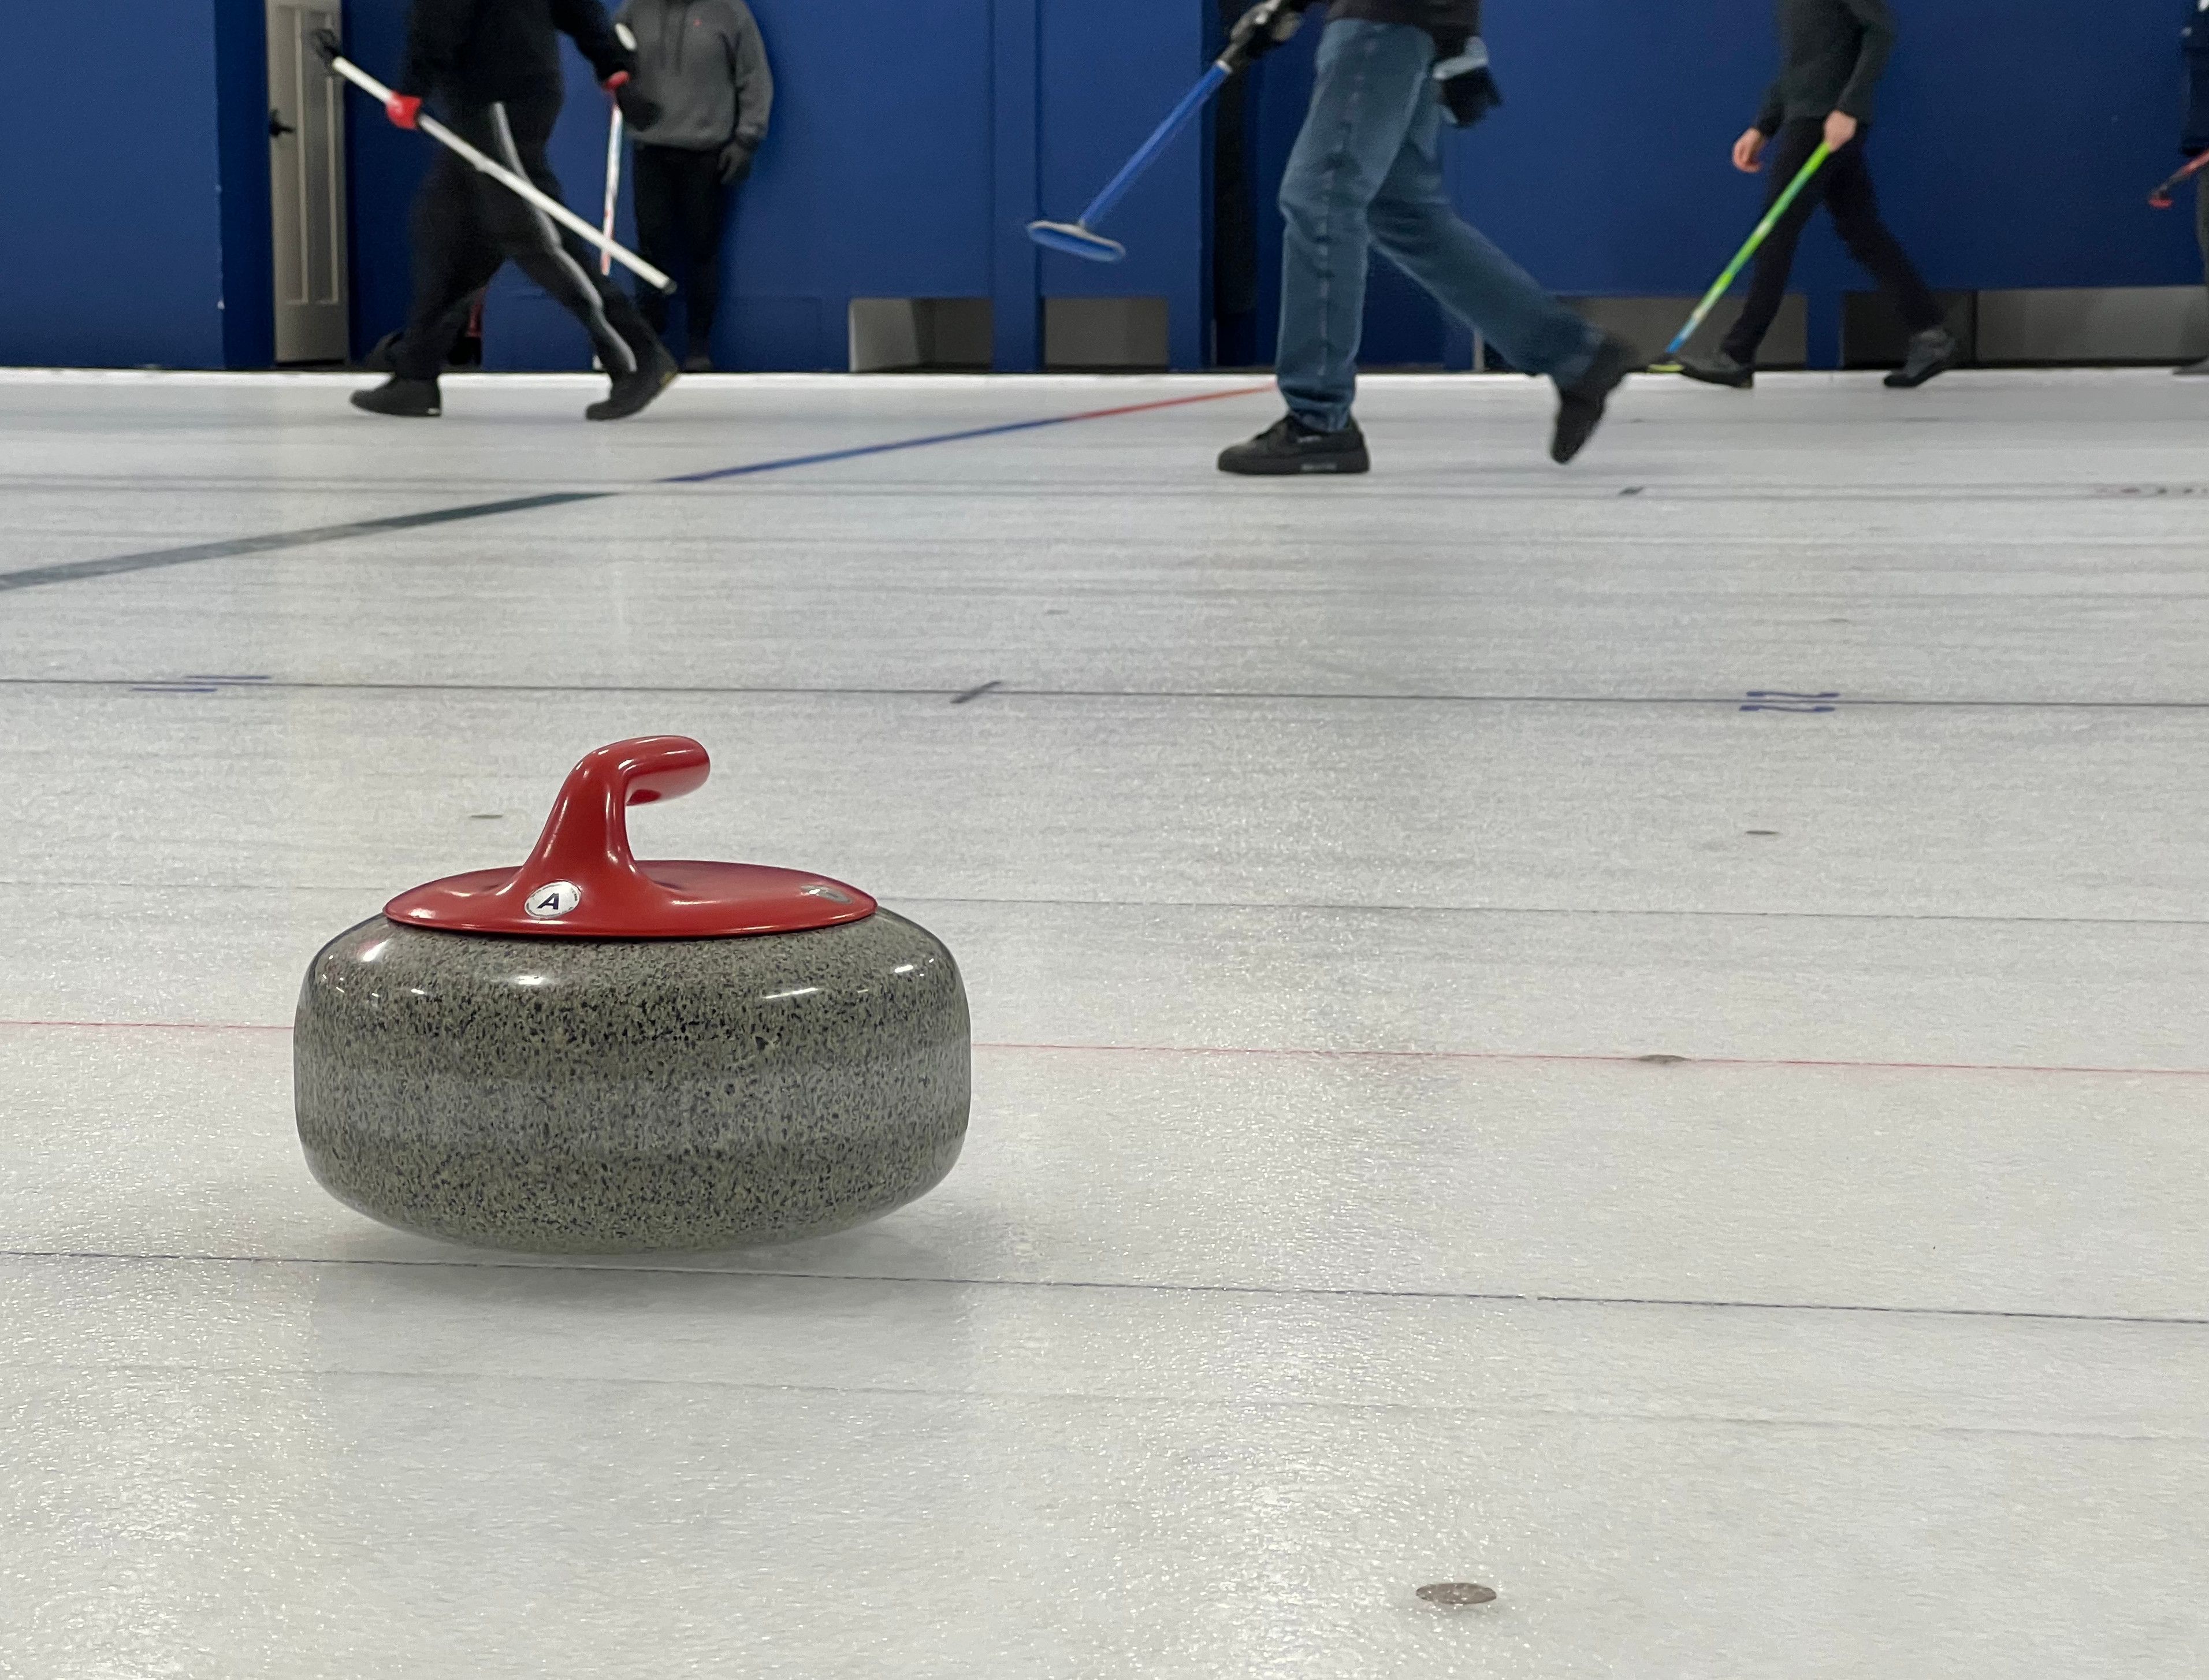 A curling stone with a red handle sits on a white sheet of ice with players' feet in the background.